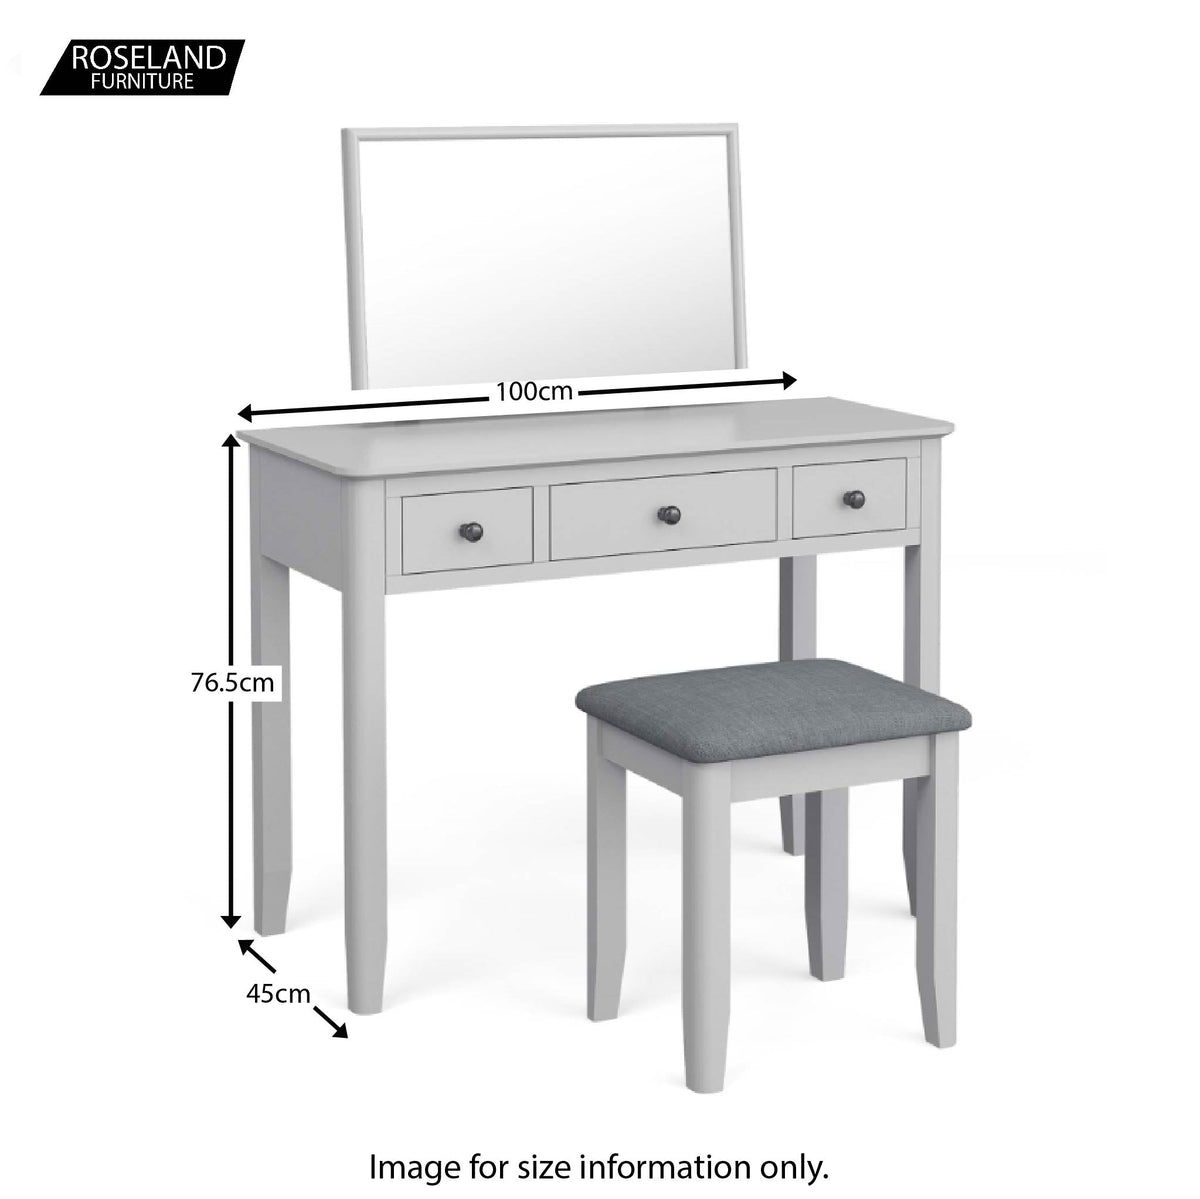 Elgin Dressing Table Set with Vanity Mirror & Stool size guide